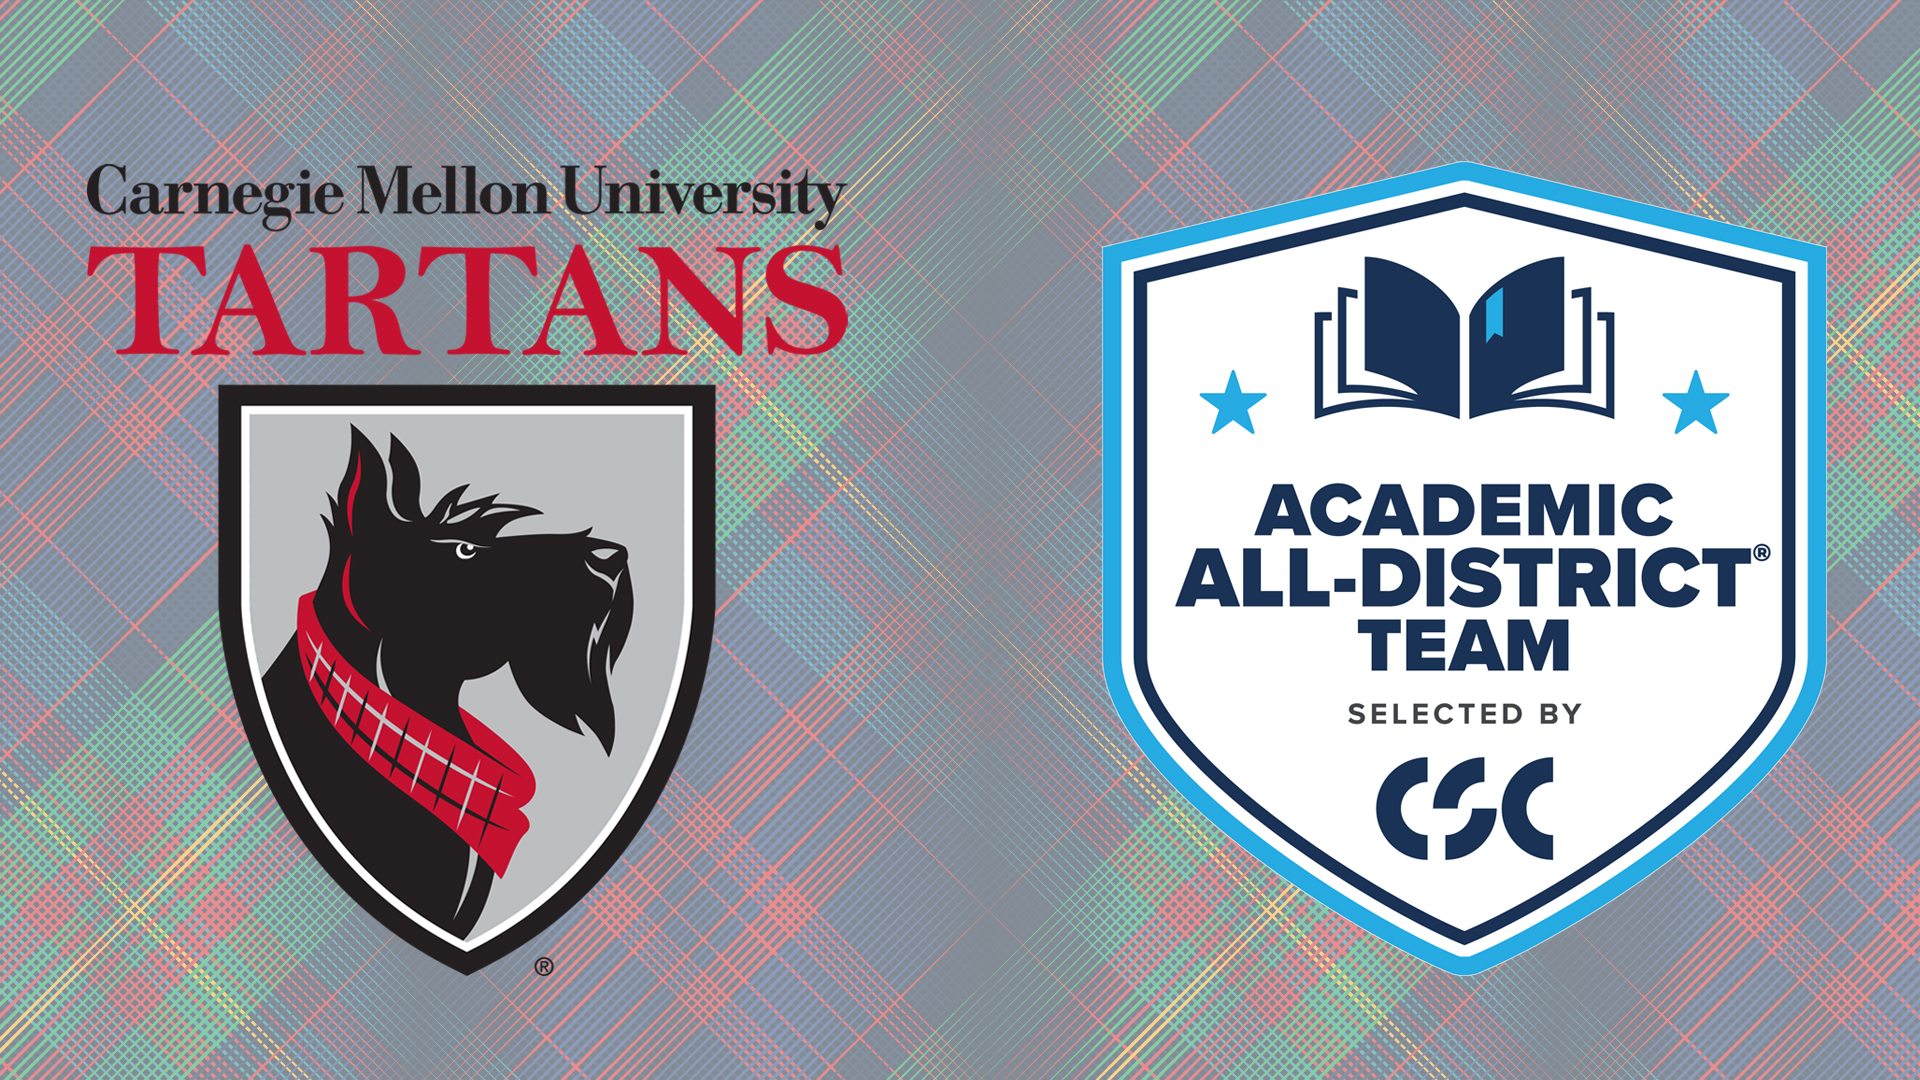 green, red, blue plaid background with Carnegie Mellon University Tartans logo (side profile of a scottie dog) and Academic All-District Team presented by CSC logo